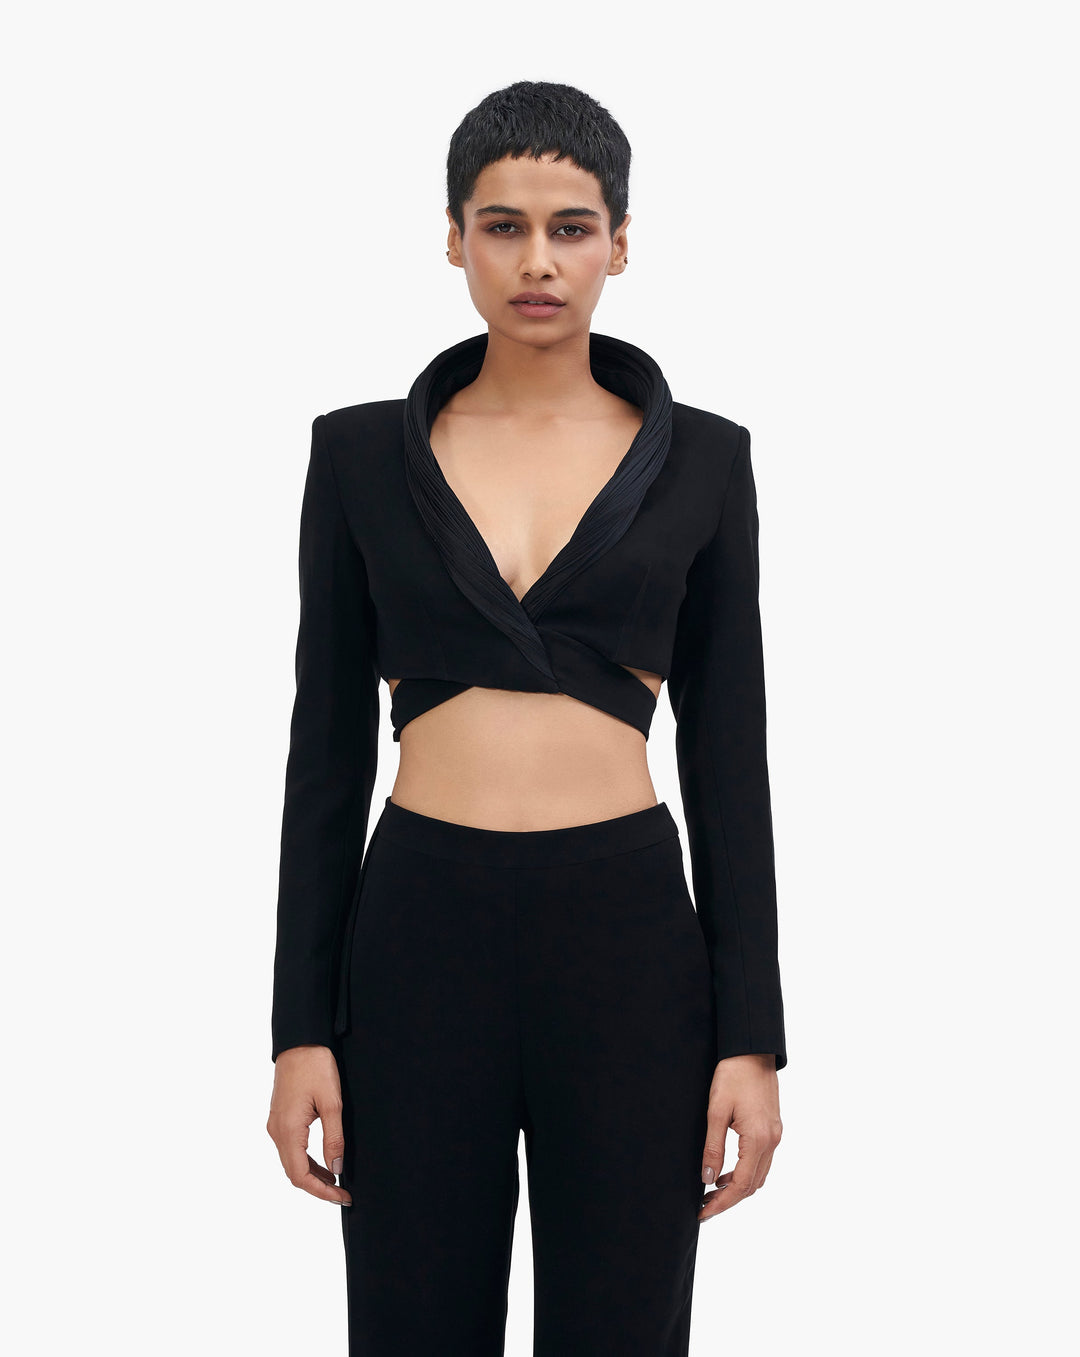 The Concentric Black Cropped Tux